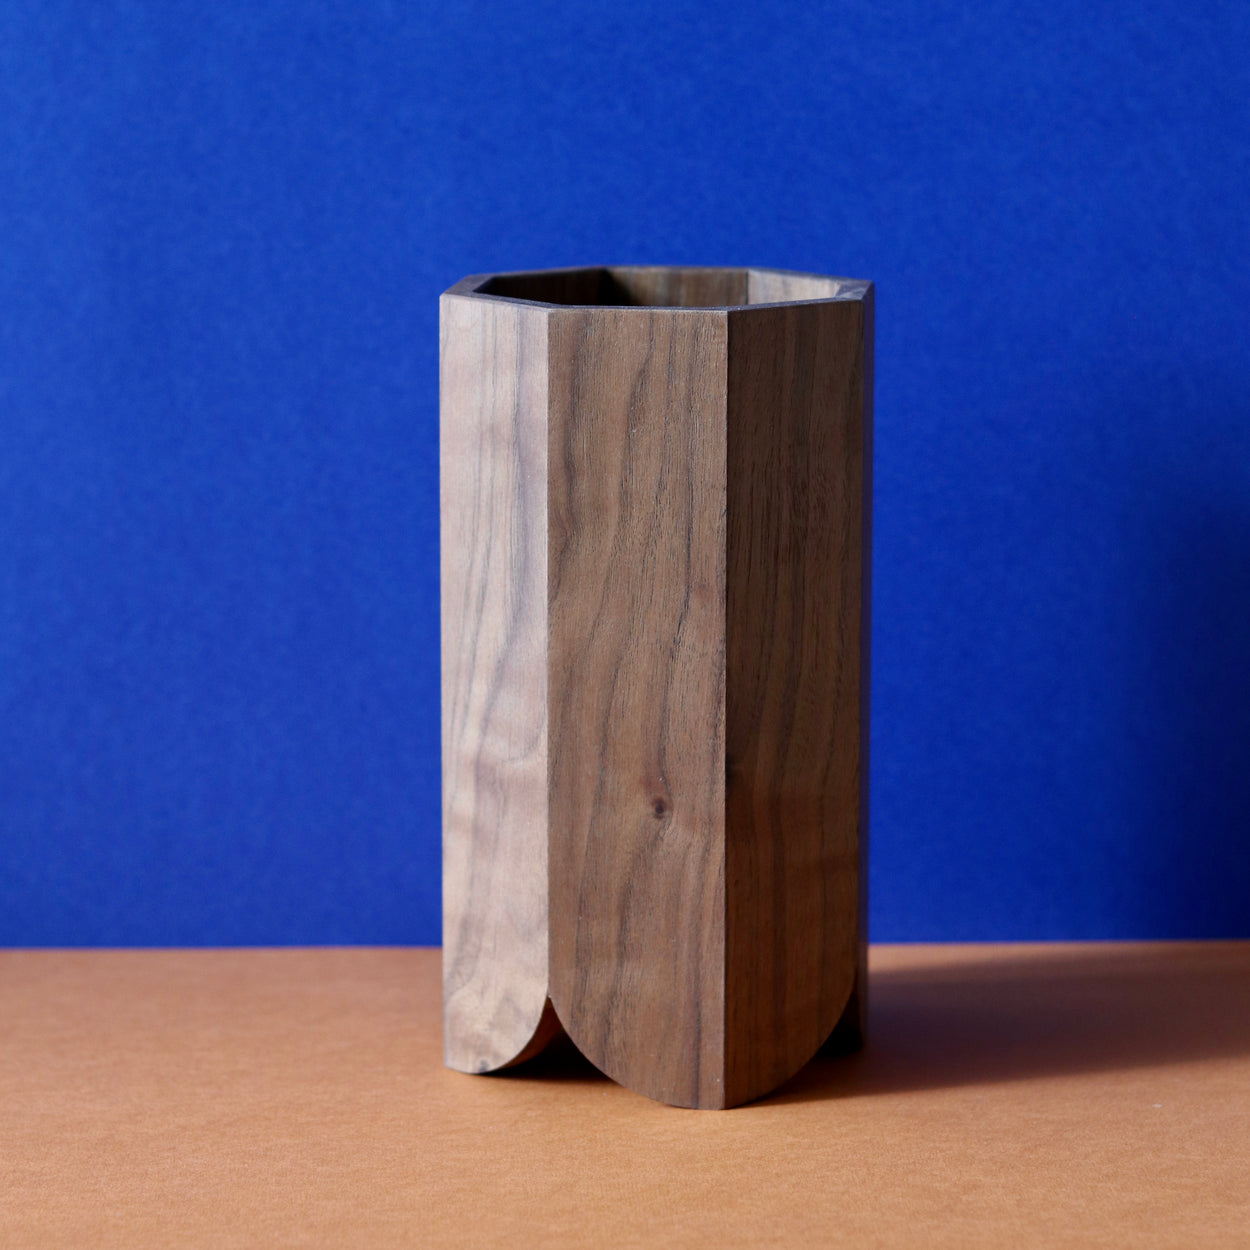 Handmade Wood Kitchen Utensil Holder in walnut against a blue and brown background.